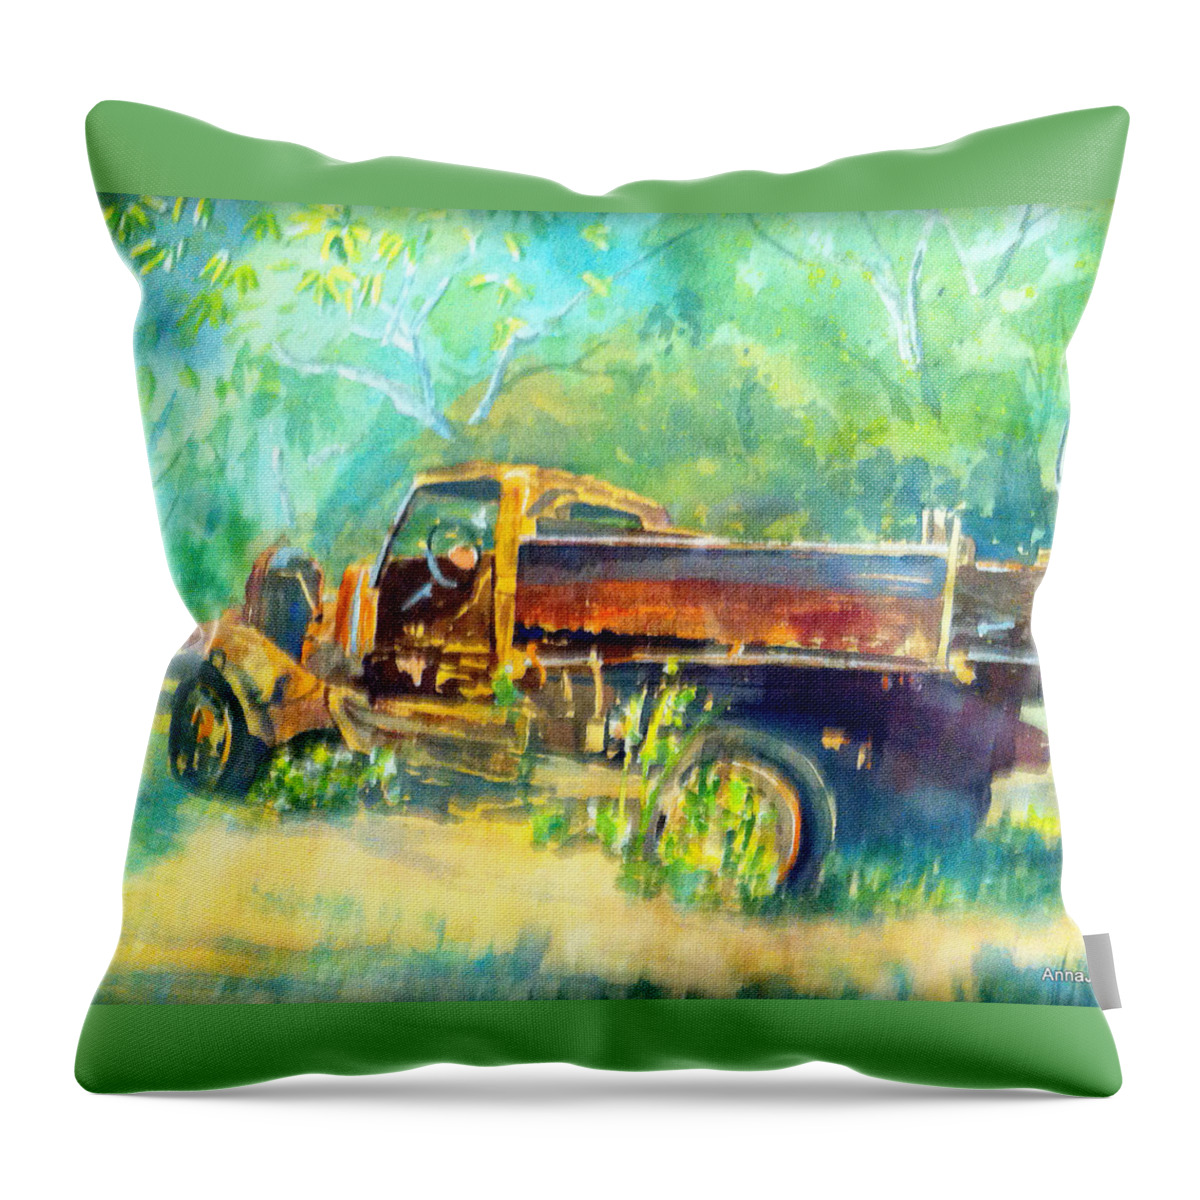 Lignum Vitae Key Throw Pillow featuring the painting Key Truck by AnnaJo Vahle